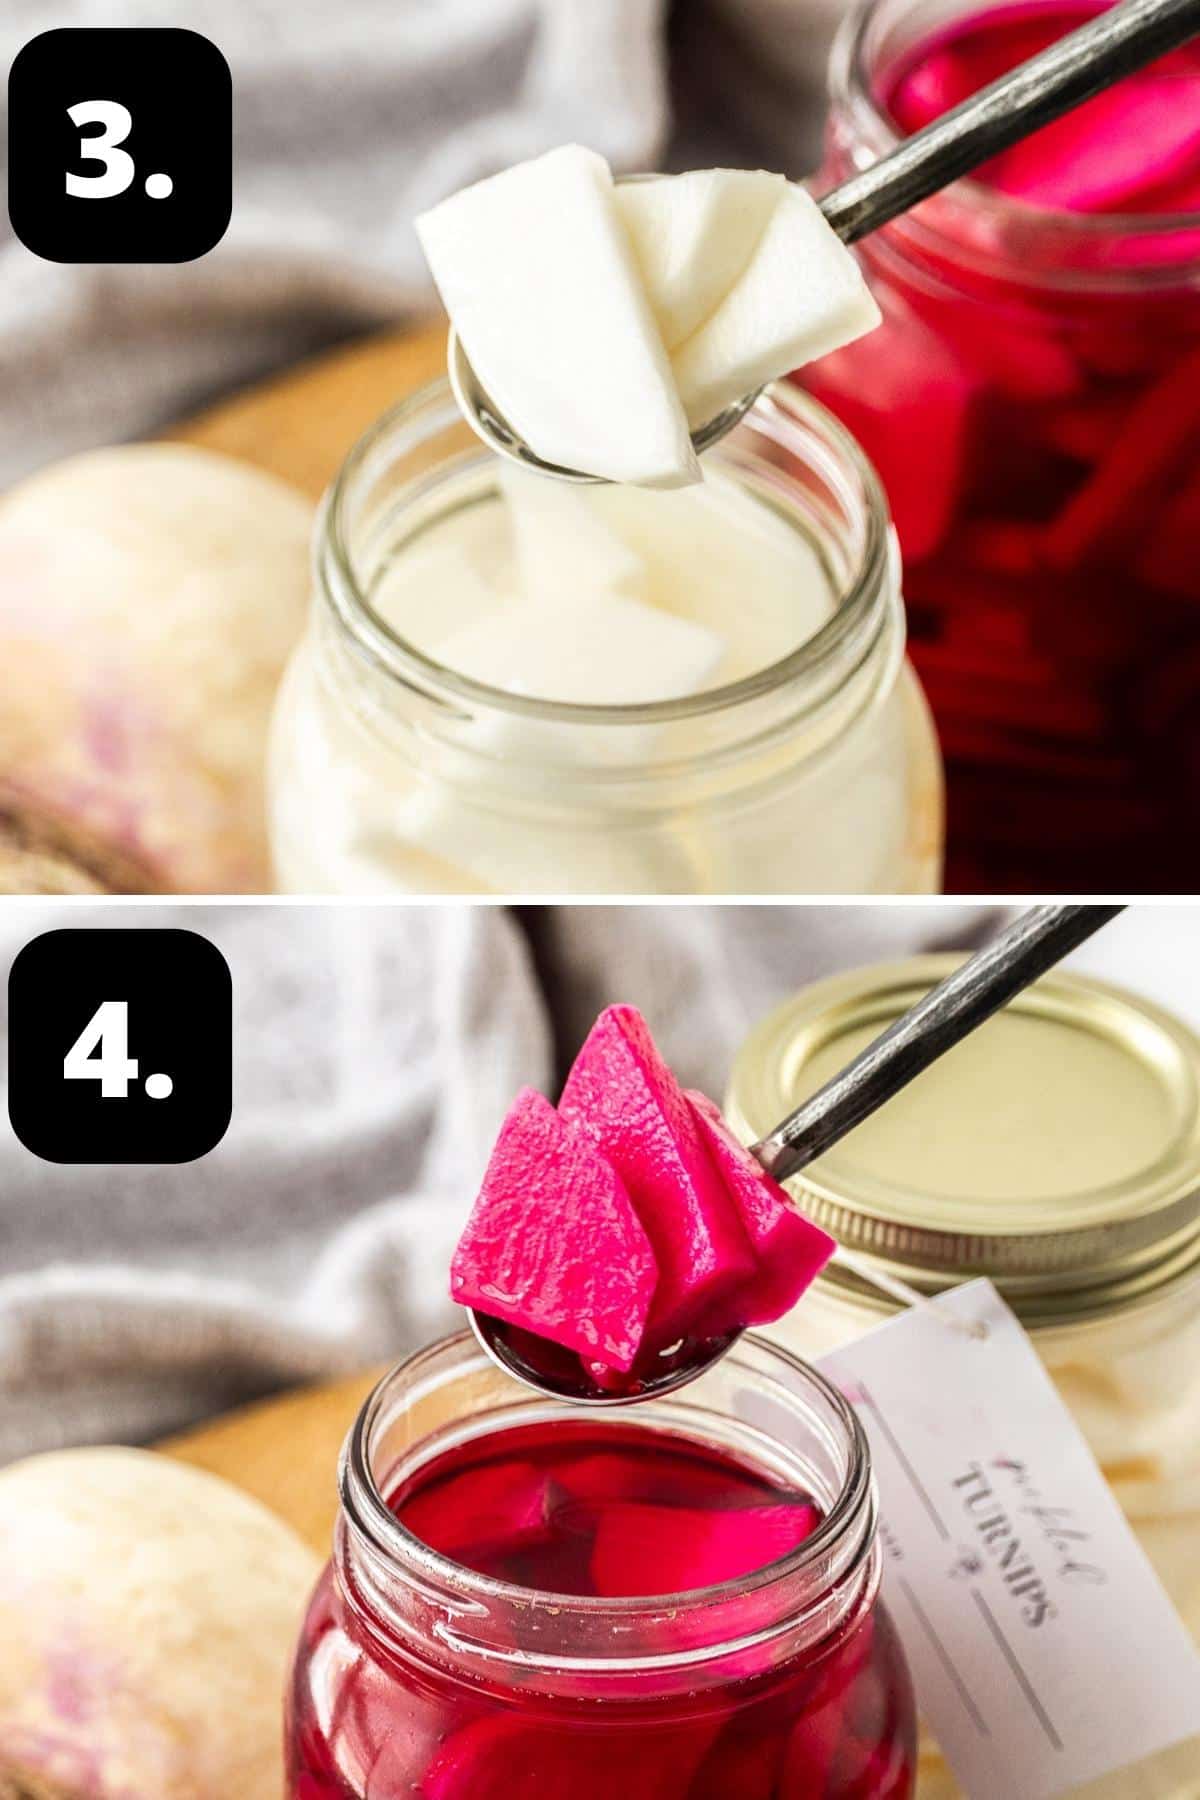 Steps 3-4 of preparing this recipe - the pickled turnips without and with beetroot, being lifted out of their jars.